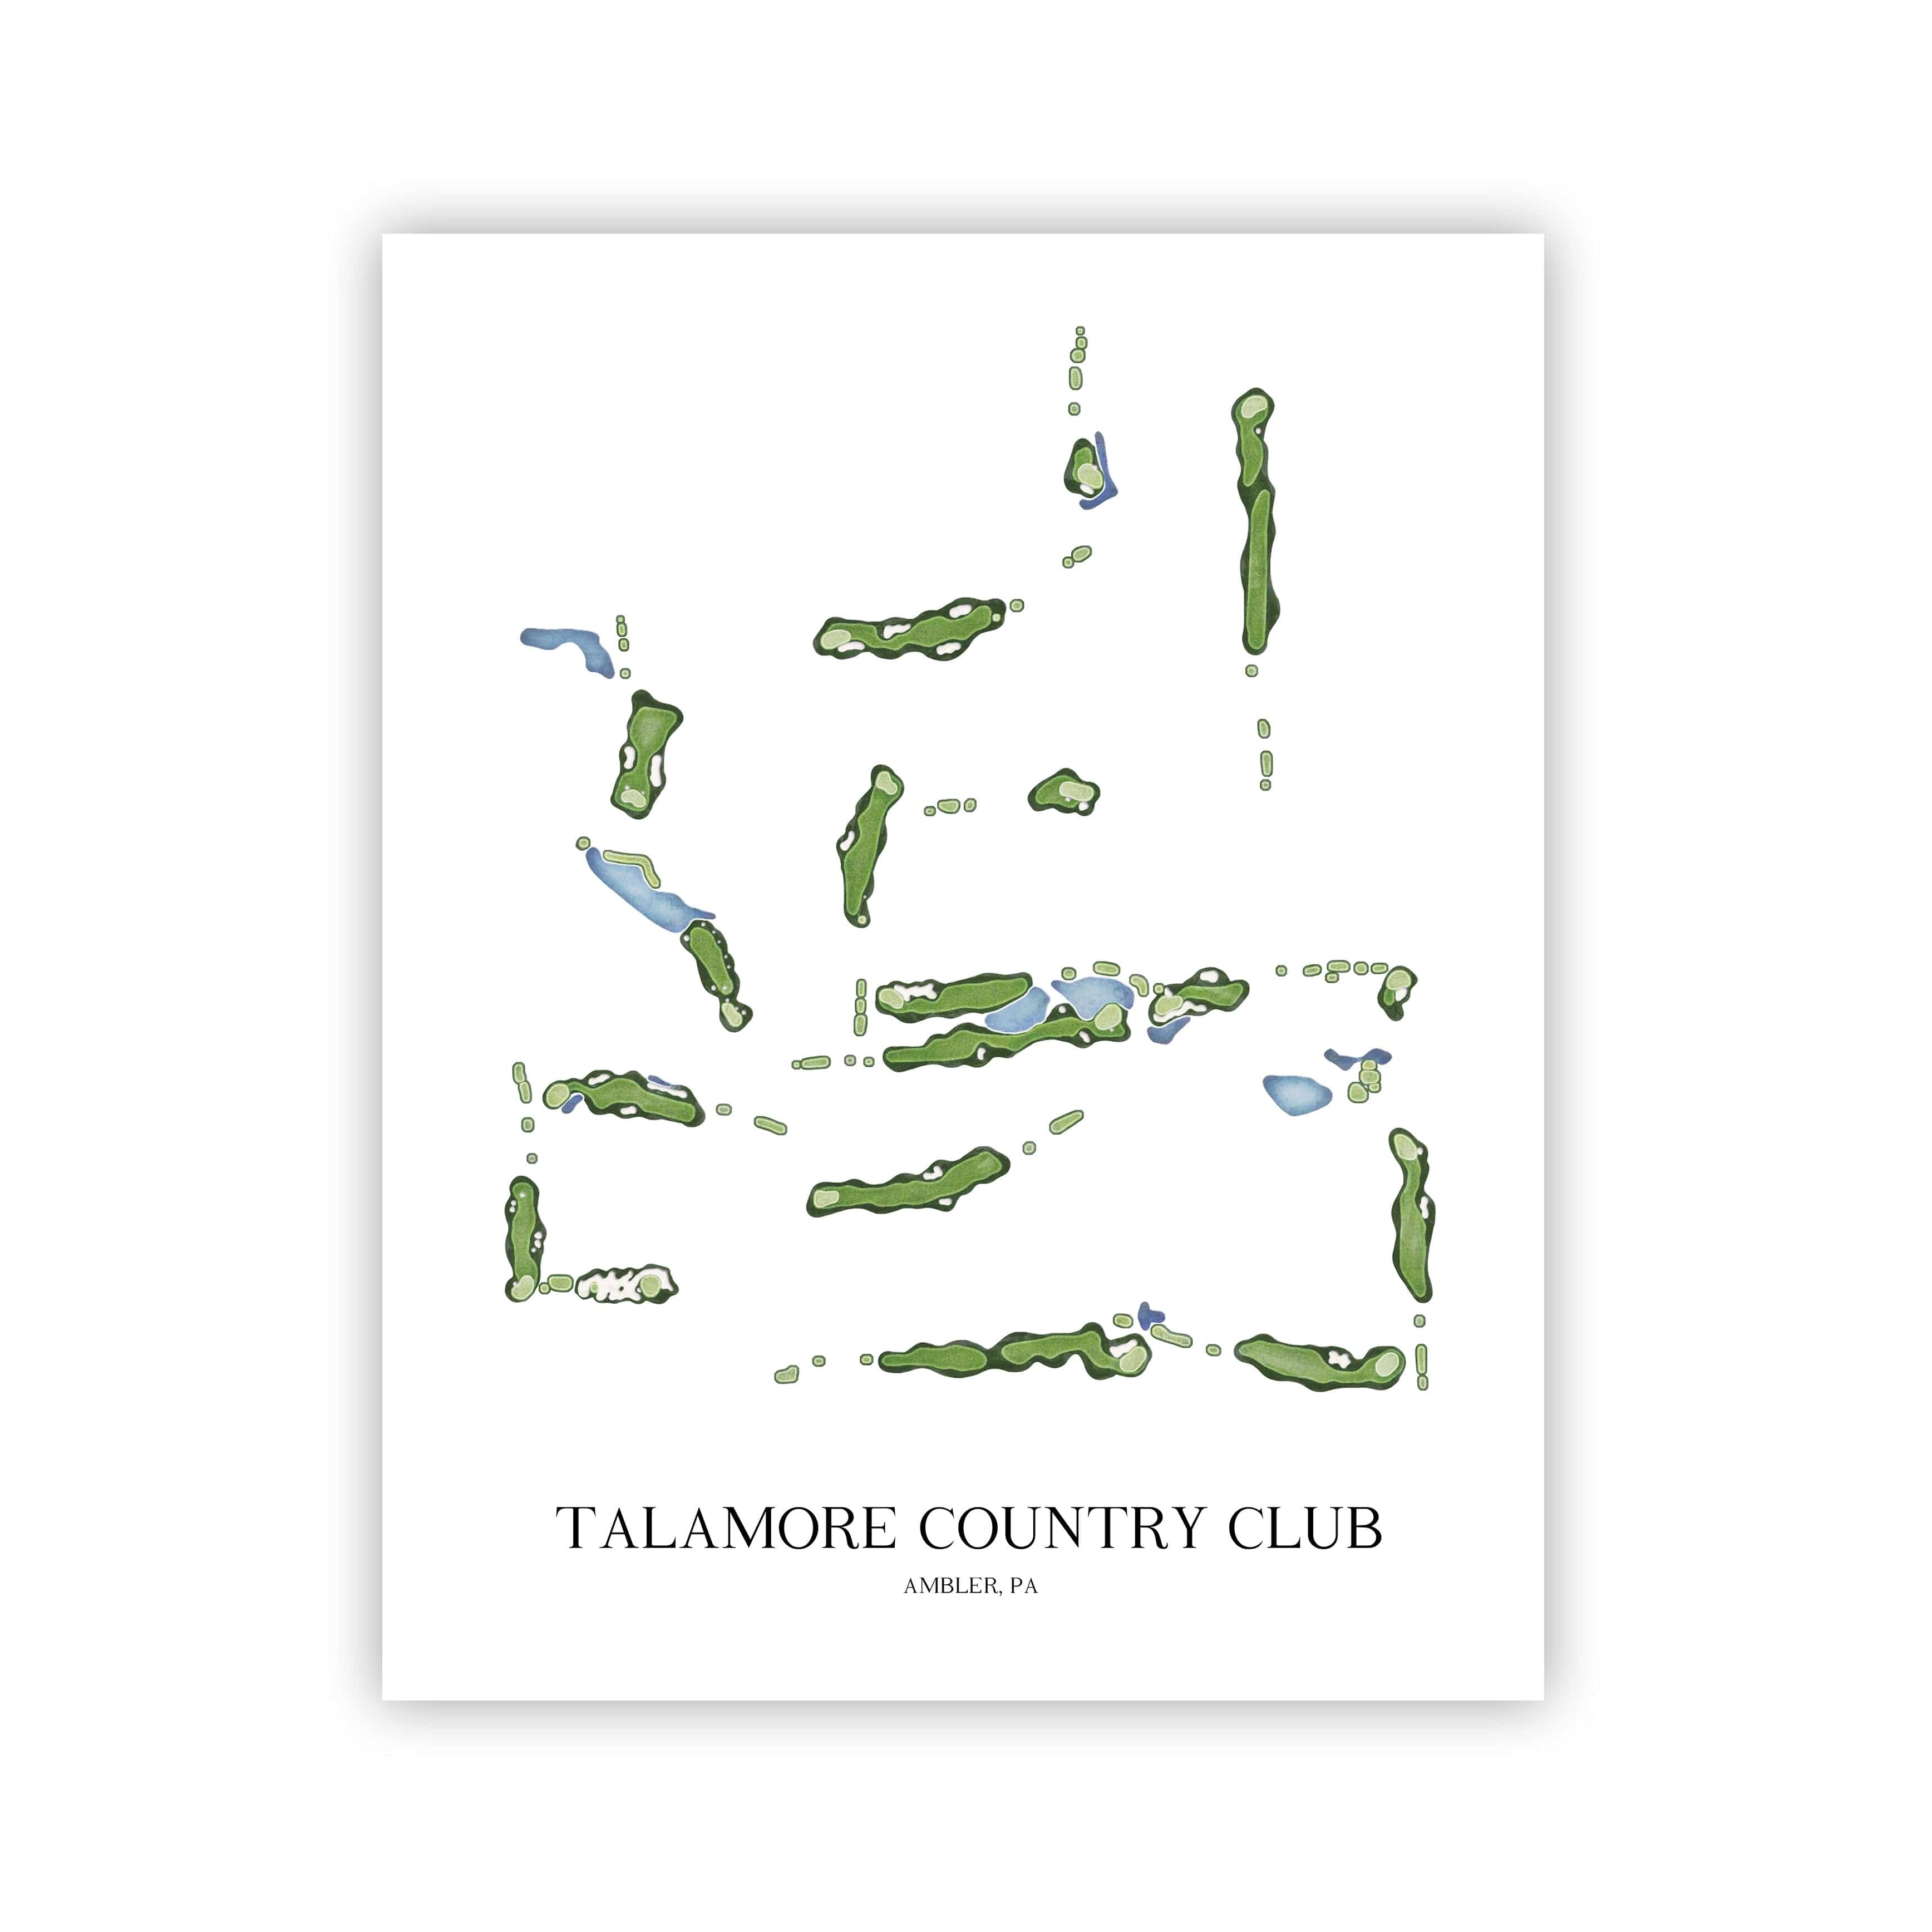 The 19th Hole Golf Shop - Golf Course Prints -  Talamore Country Club Golf Course Map